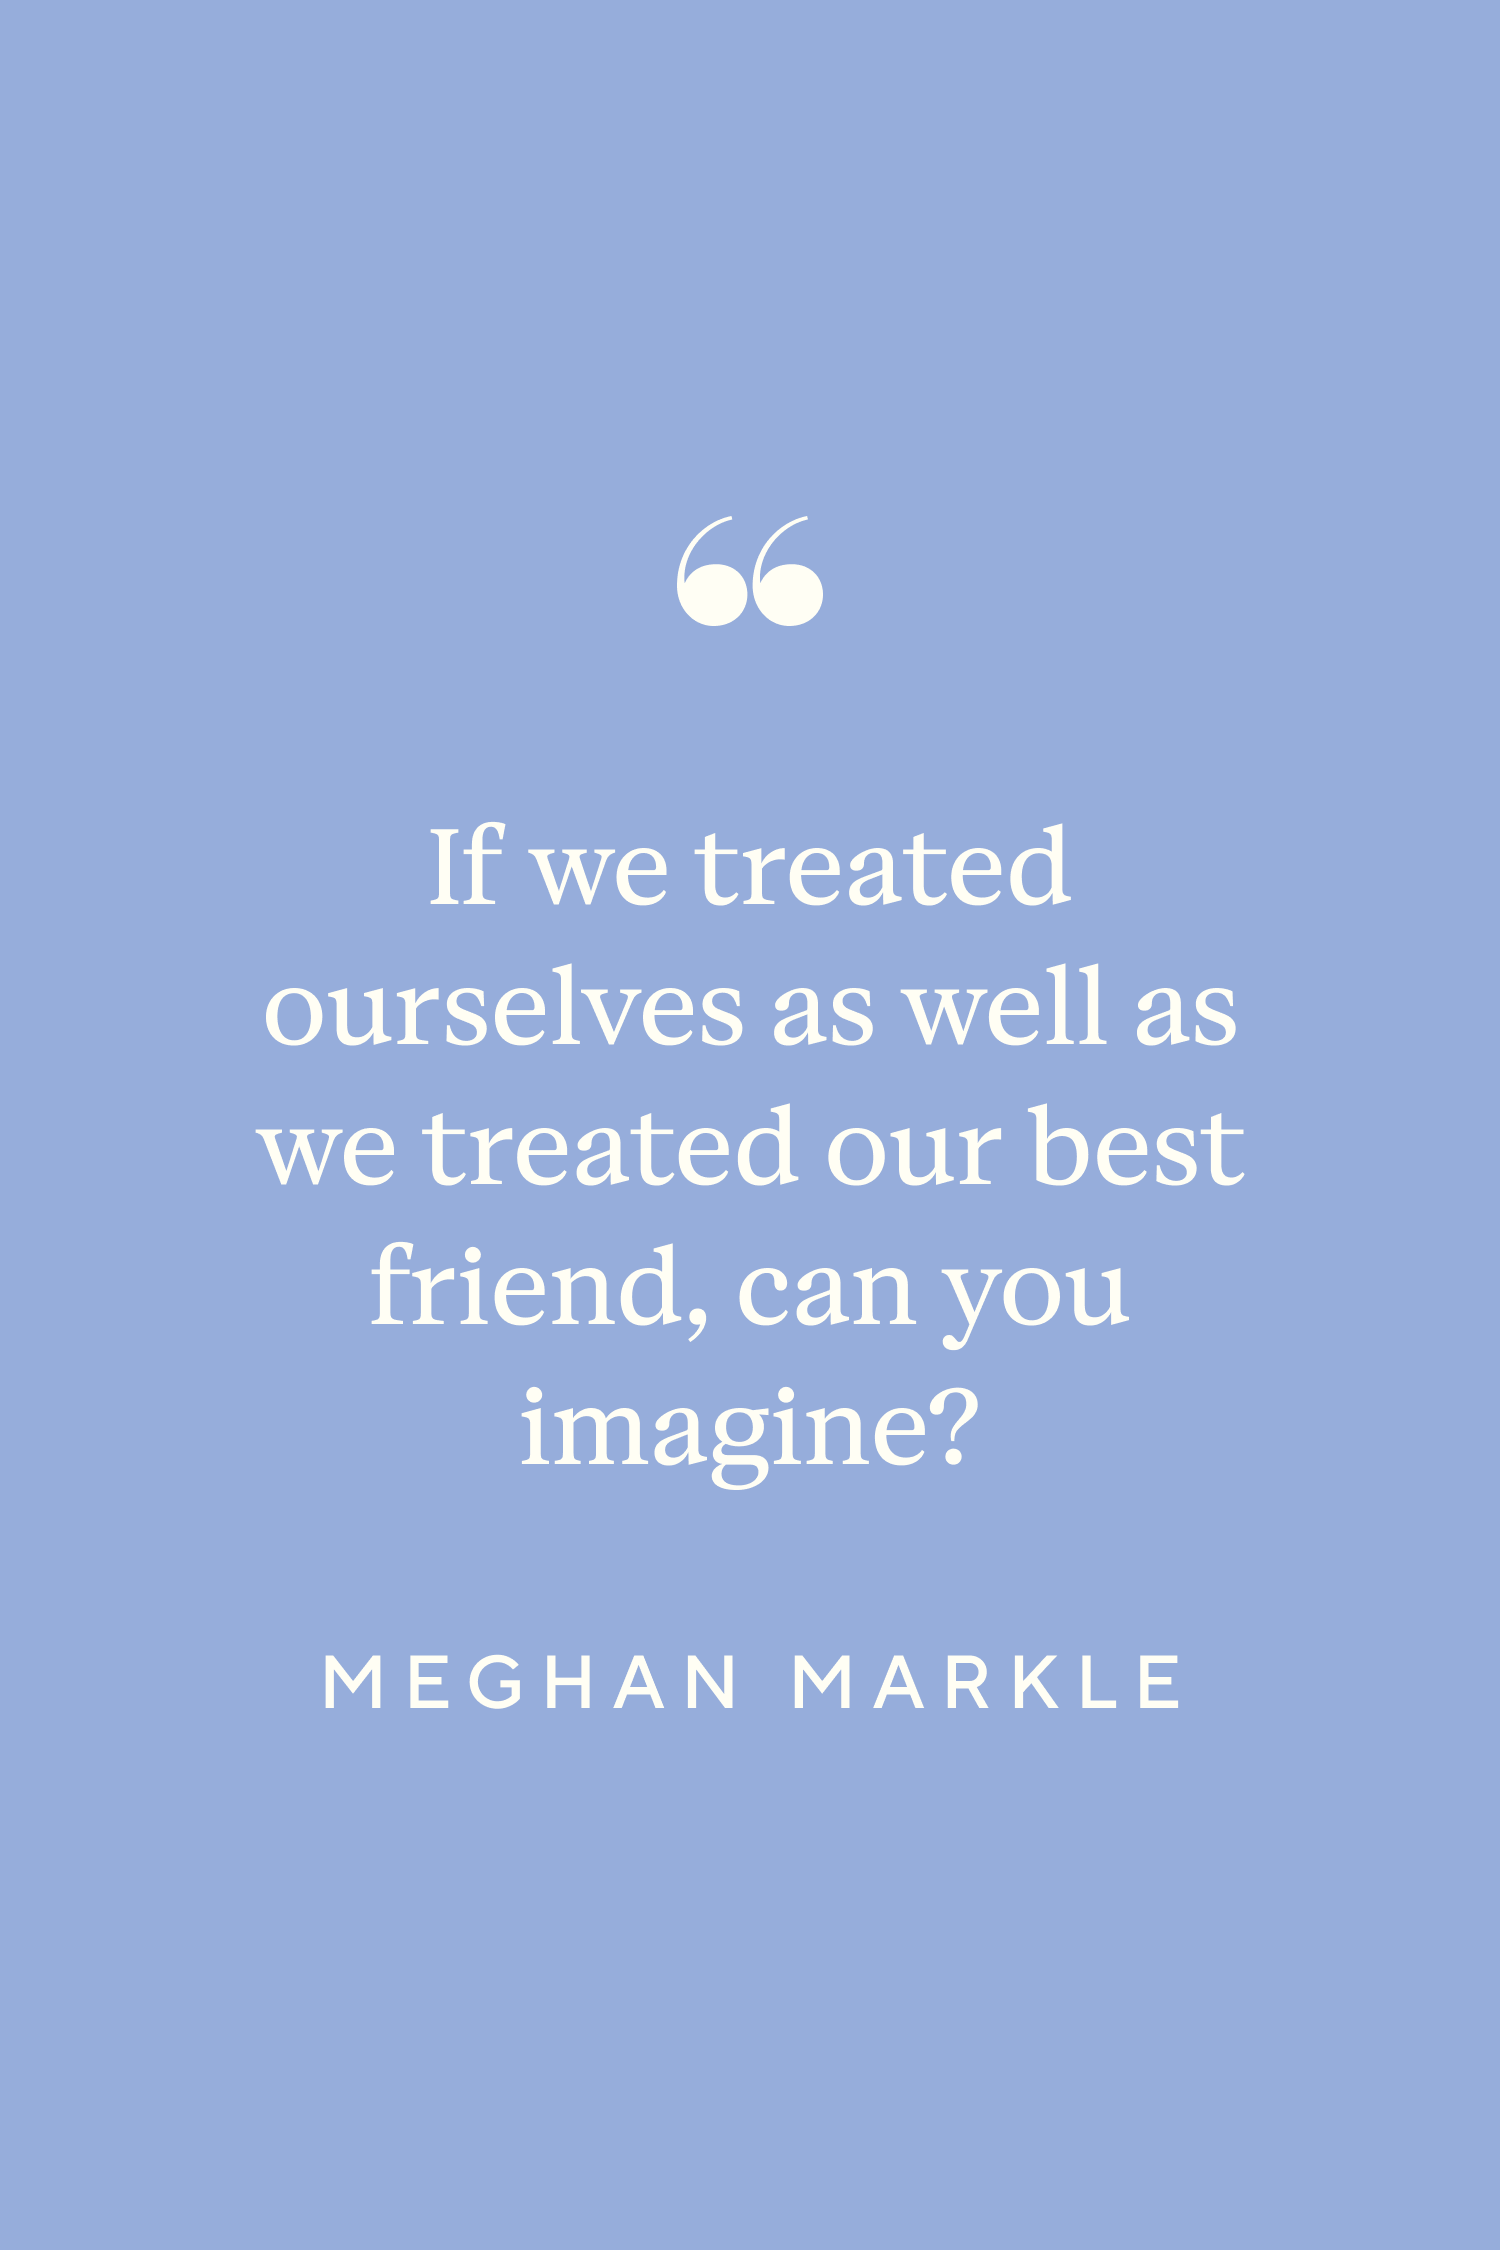 quotes about friendship and life and love